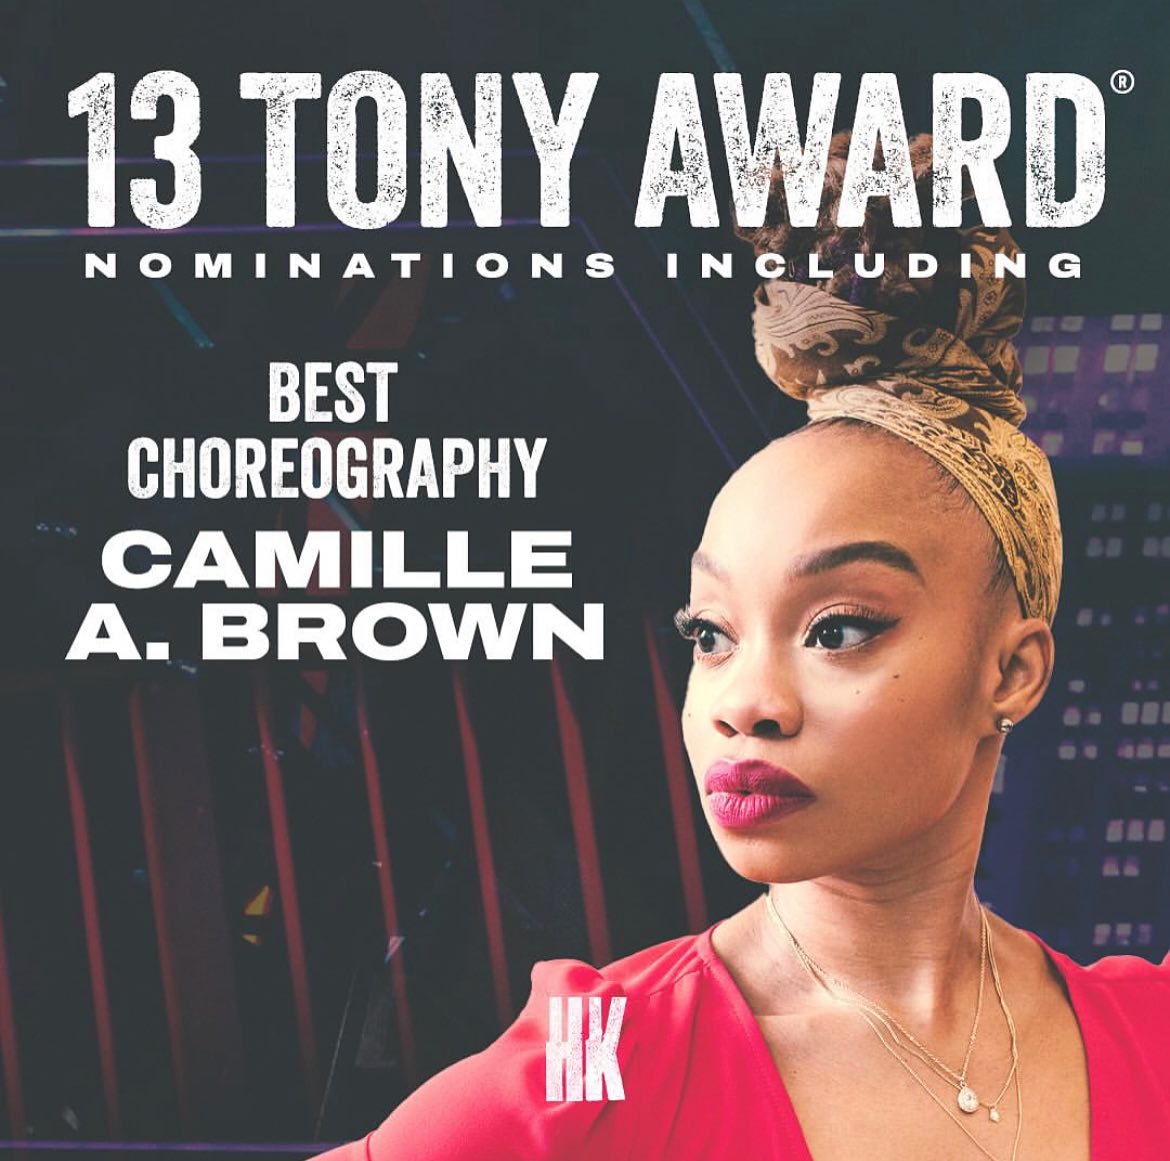 Help us celebrate CDI alum @CamilleABrown, who was just nominated by @TheTonyAwards! 🎊🎊🎊 Congratulations to everyone at @HellsKitchenBwy. Camille was a CDI resident in 2017 at @CUNYkcc's @OnStageAtKCC.